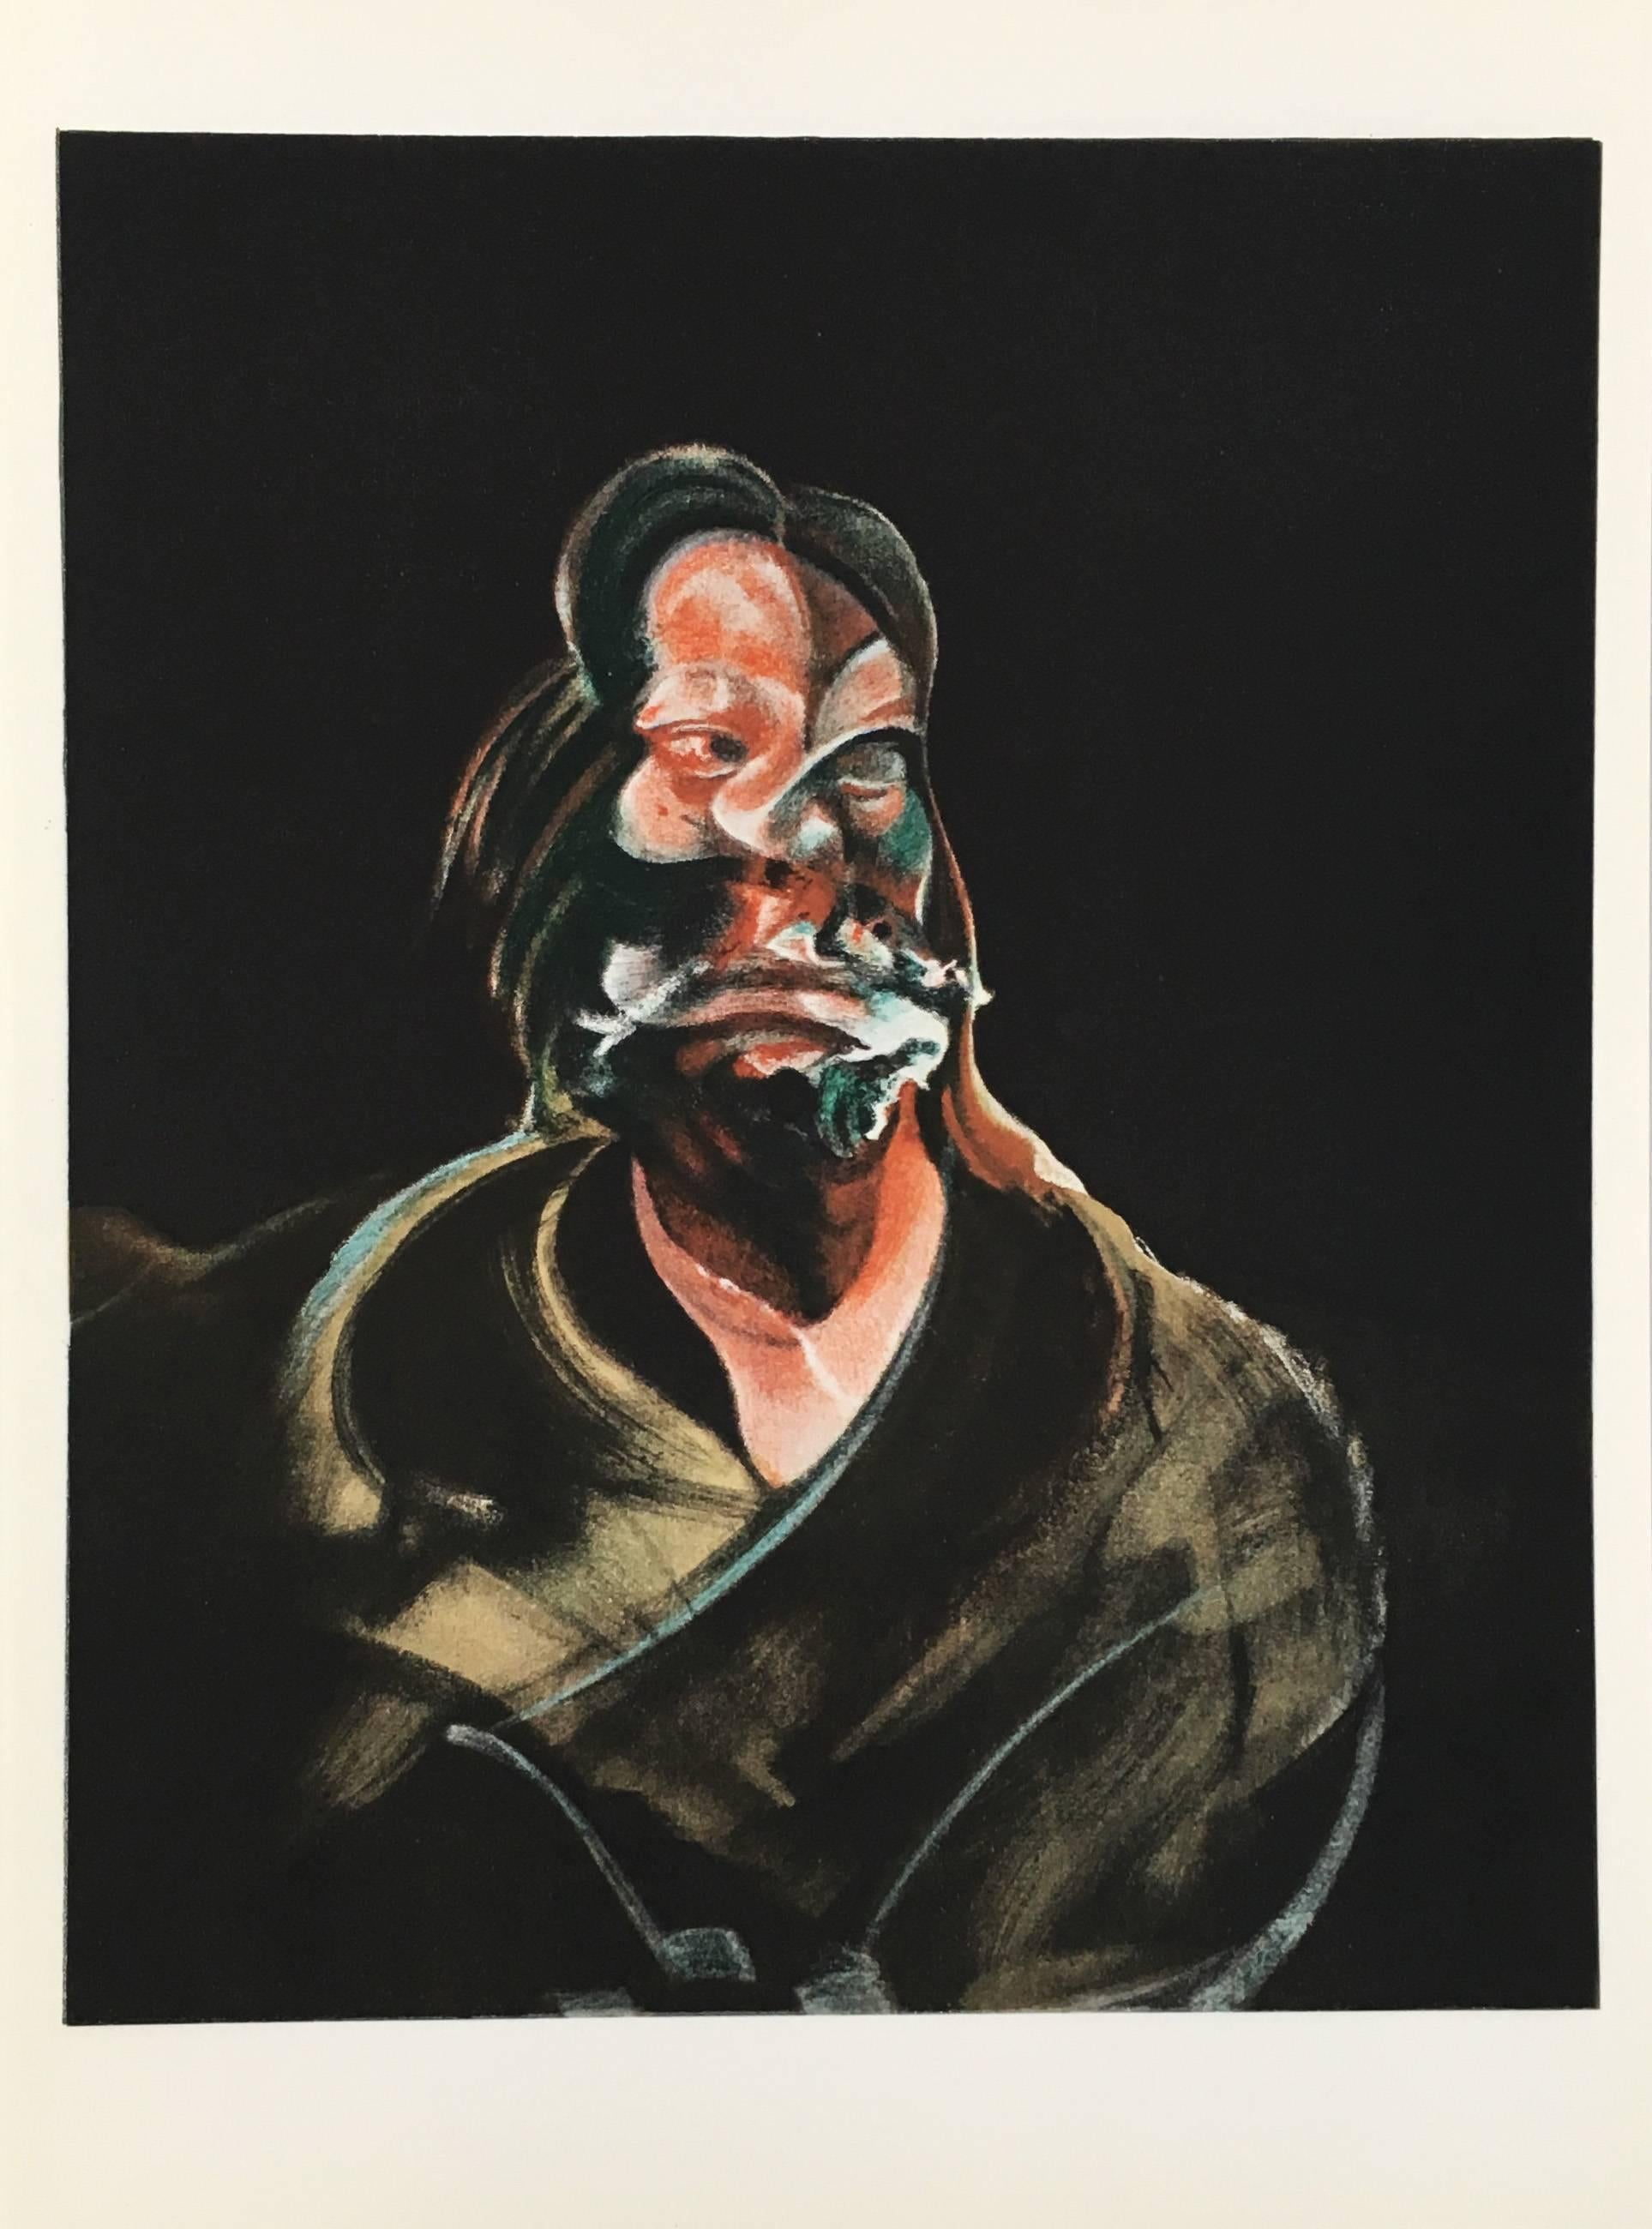 Francis Bacon Portrait of Isabel Rawsthorne Lithograph
Portfolio: Derriere Le Miroir, 1966 
Published by: Galerie Maeght, Paris
Excellent frame piece. 

Medium: Lithograph in colors on wove paper
Dimensions: 11 x 15 inches 
Very good